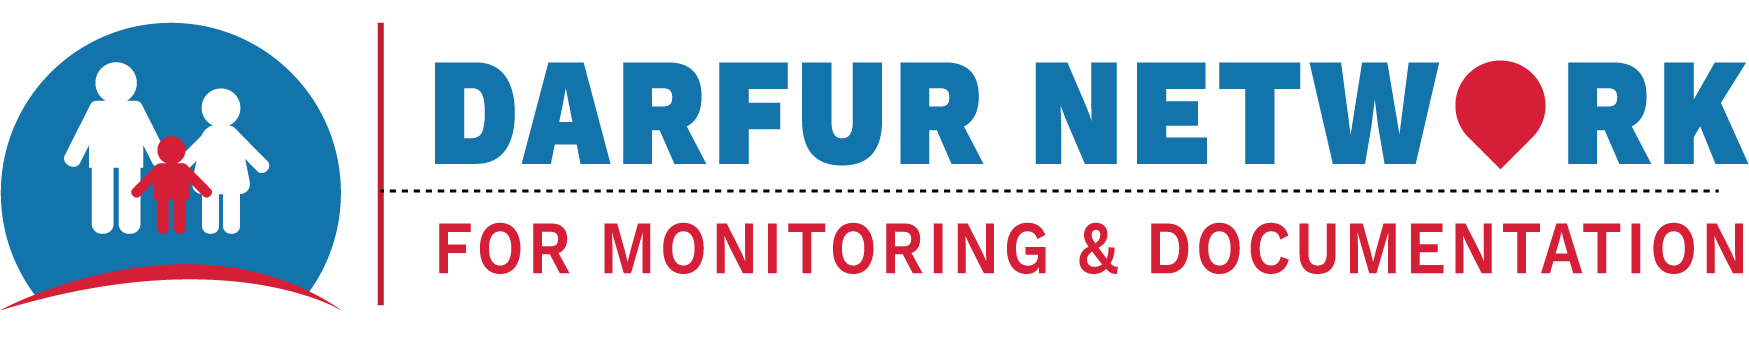 Darfur Network for Monitoring and Documentation